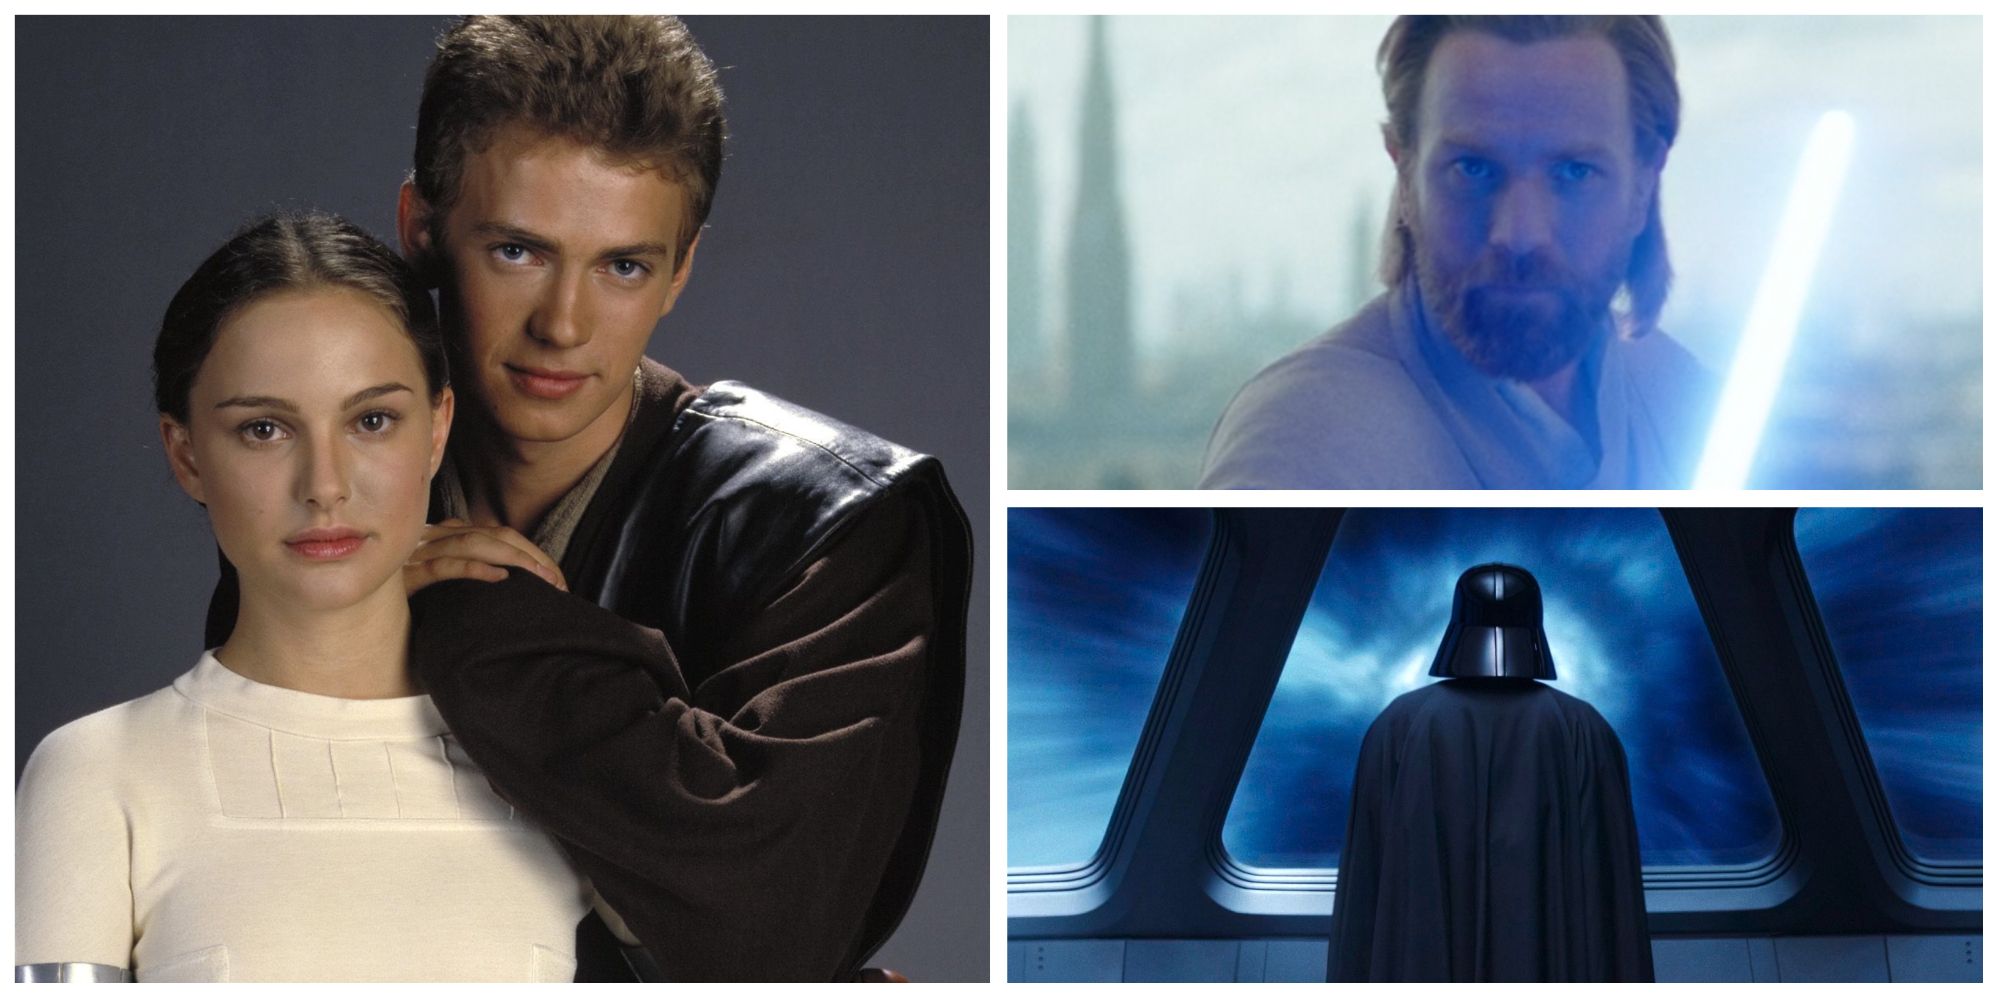 anakin with padme, darth vader and episode 2 obi-wan kenobi in a collage